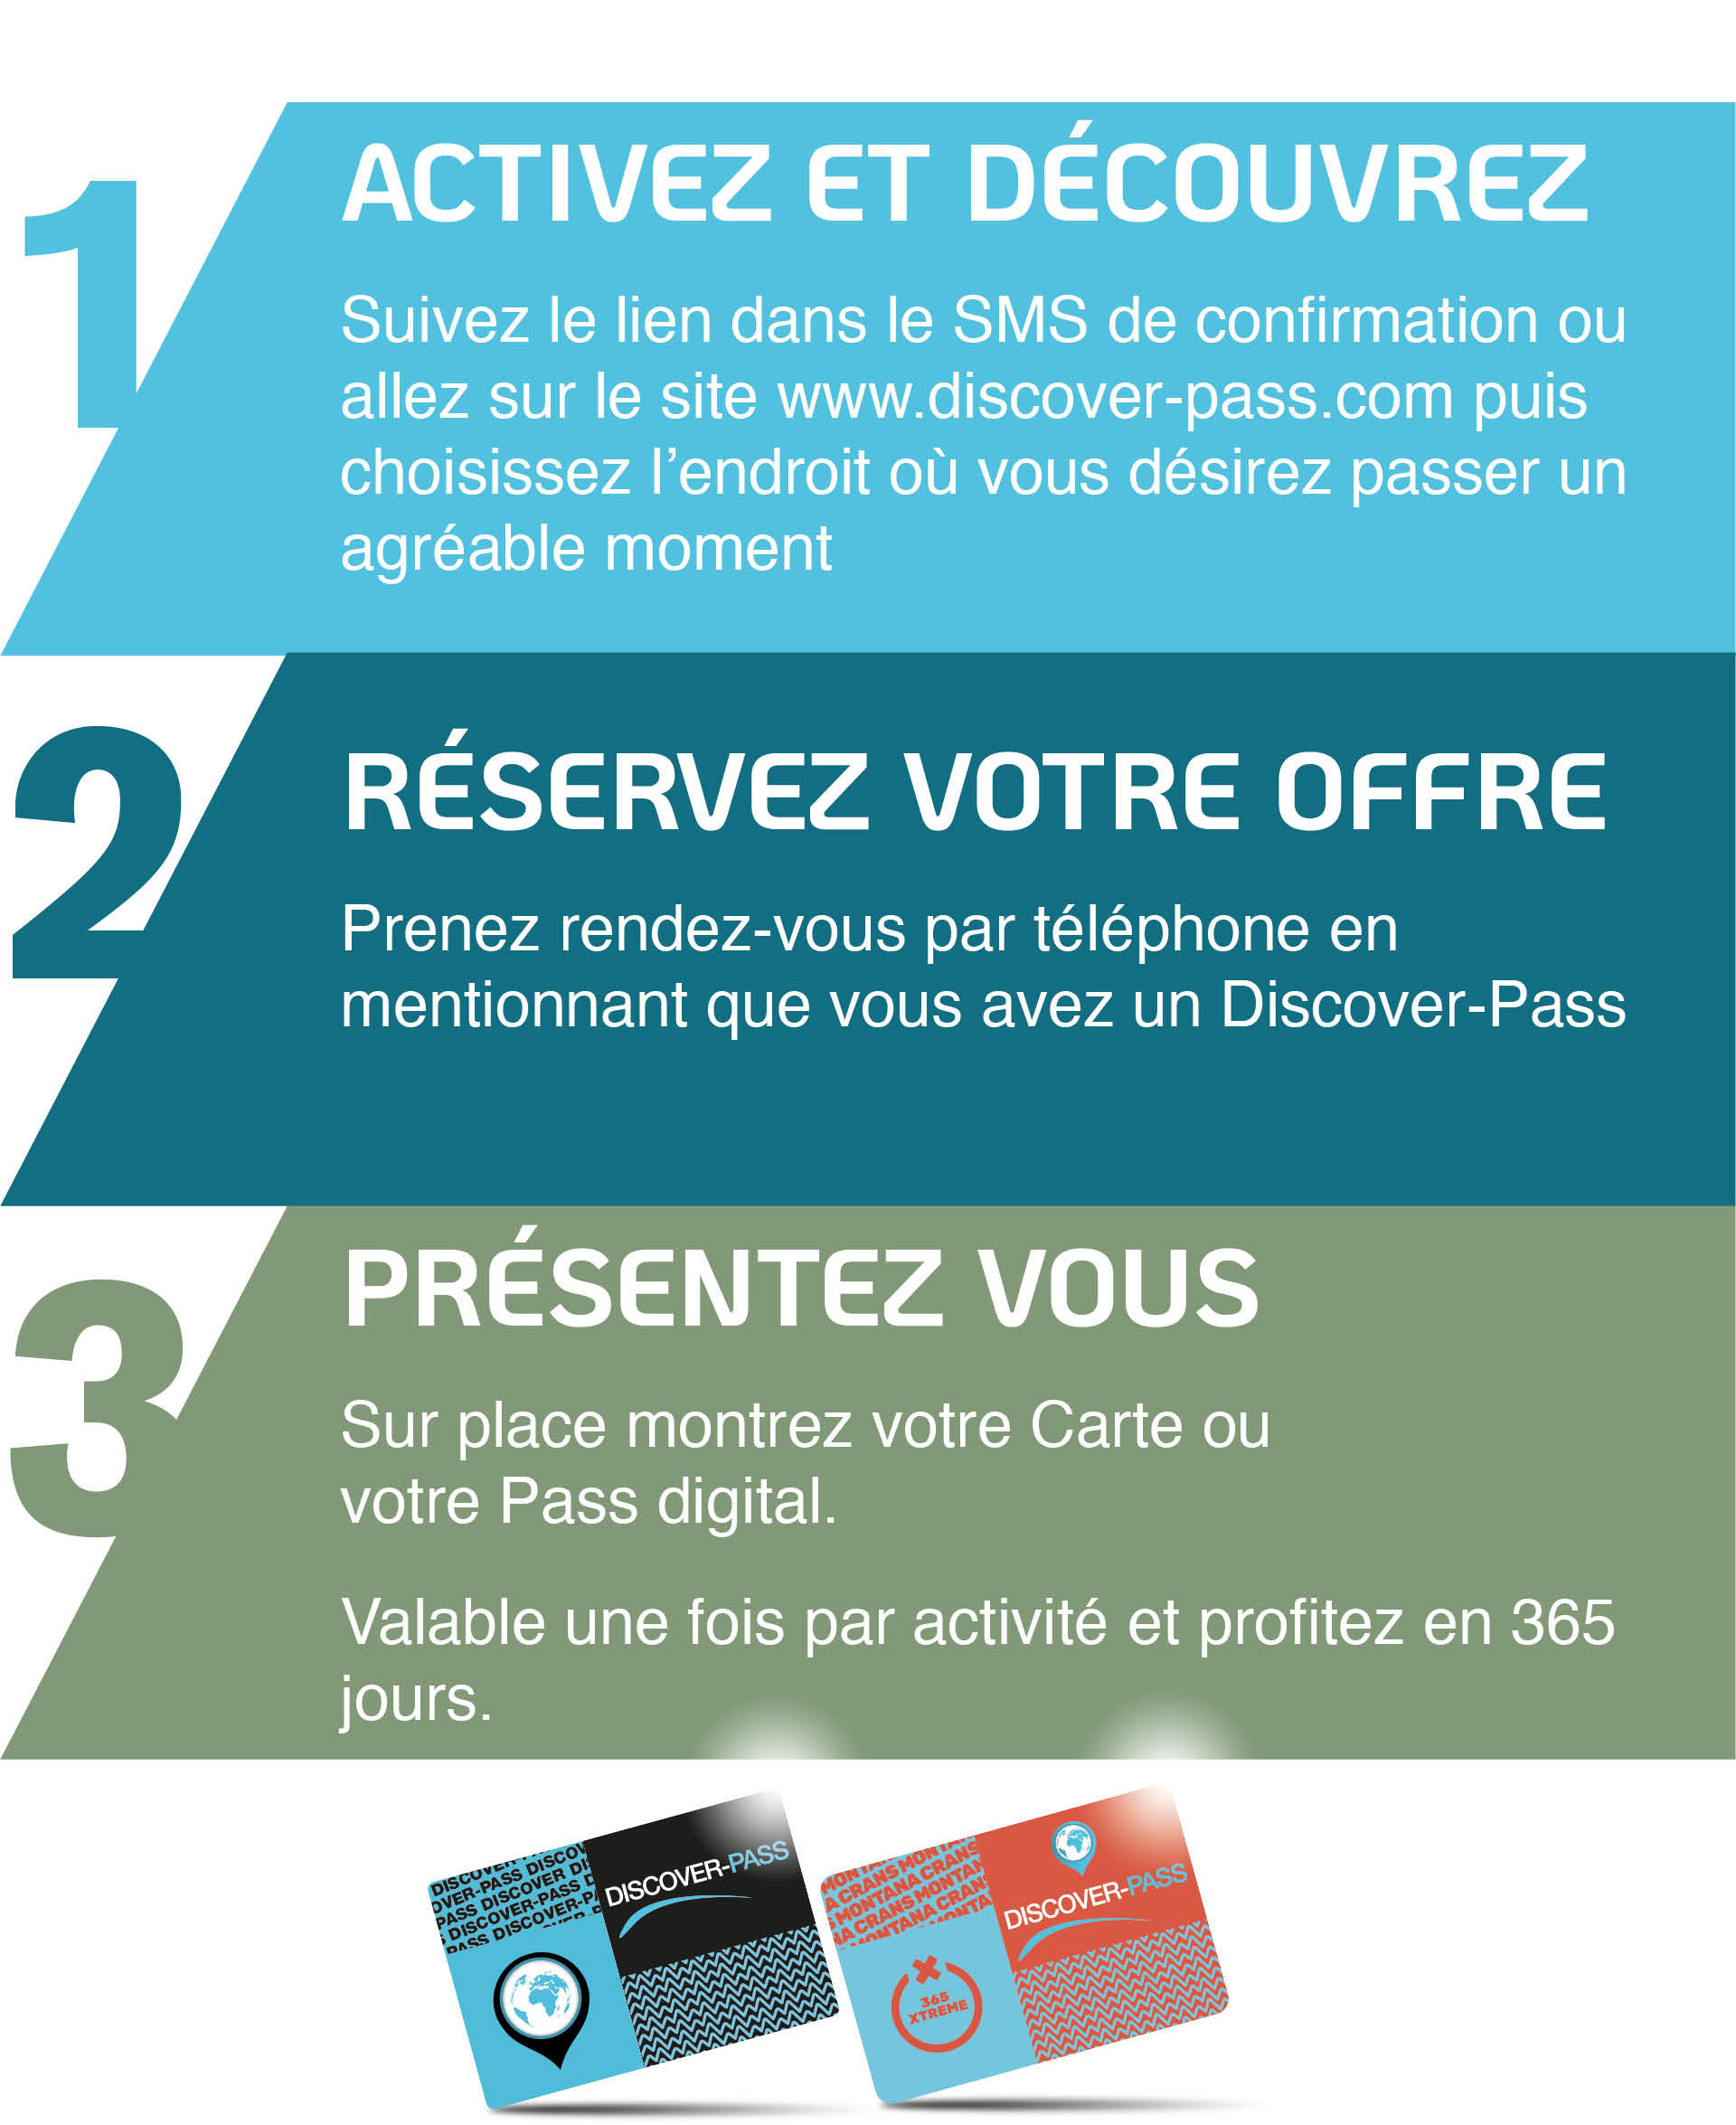 Discover-Pass